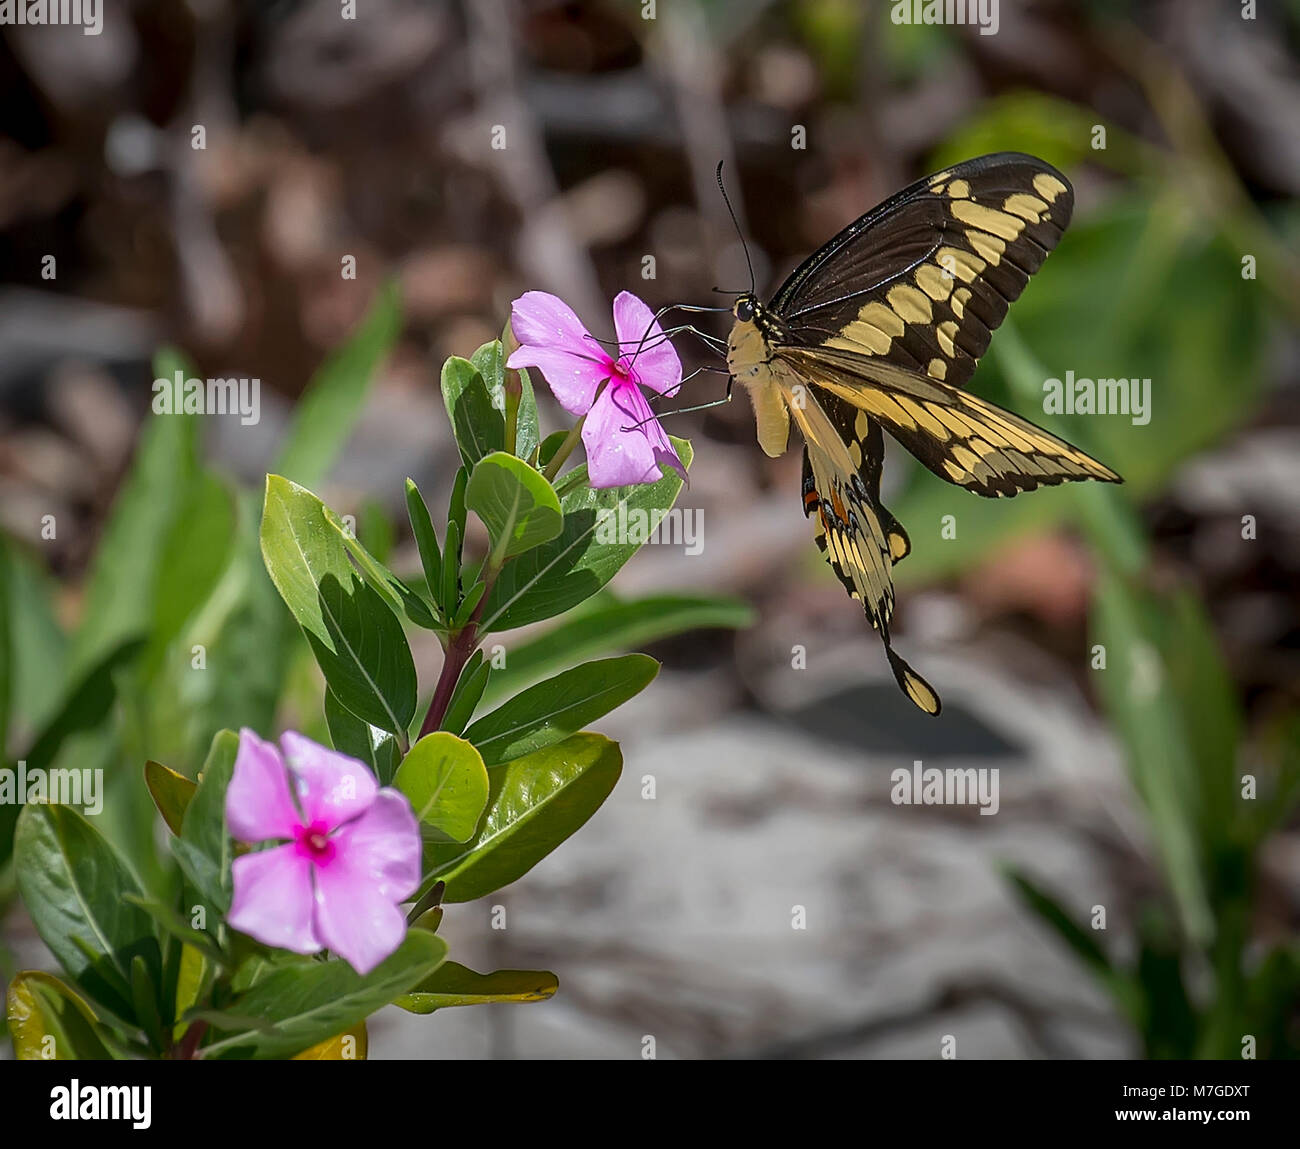 Black and yellow Swallowtail butterfly on pink wildflower Stock Photo